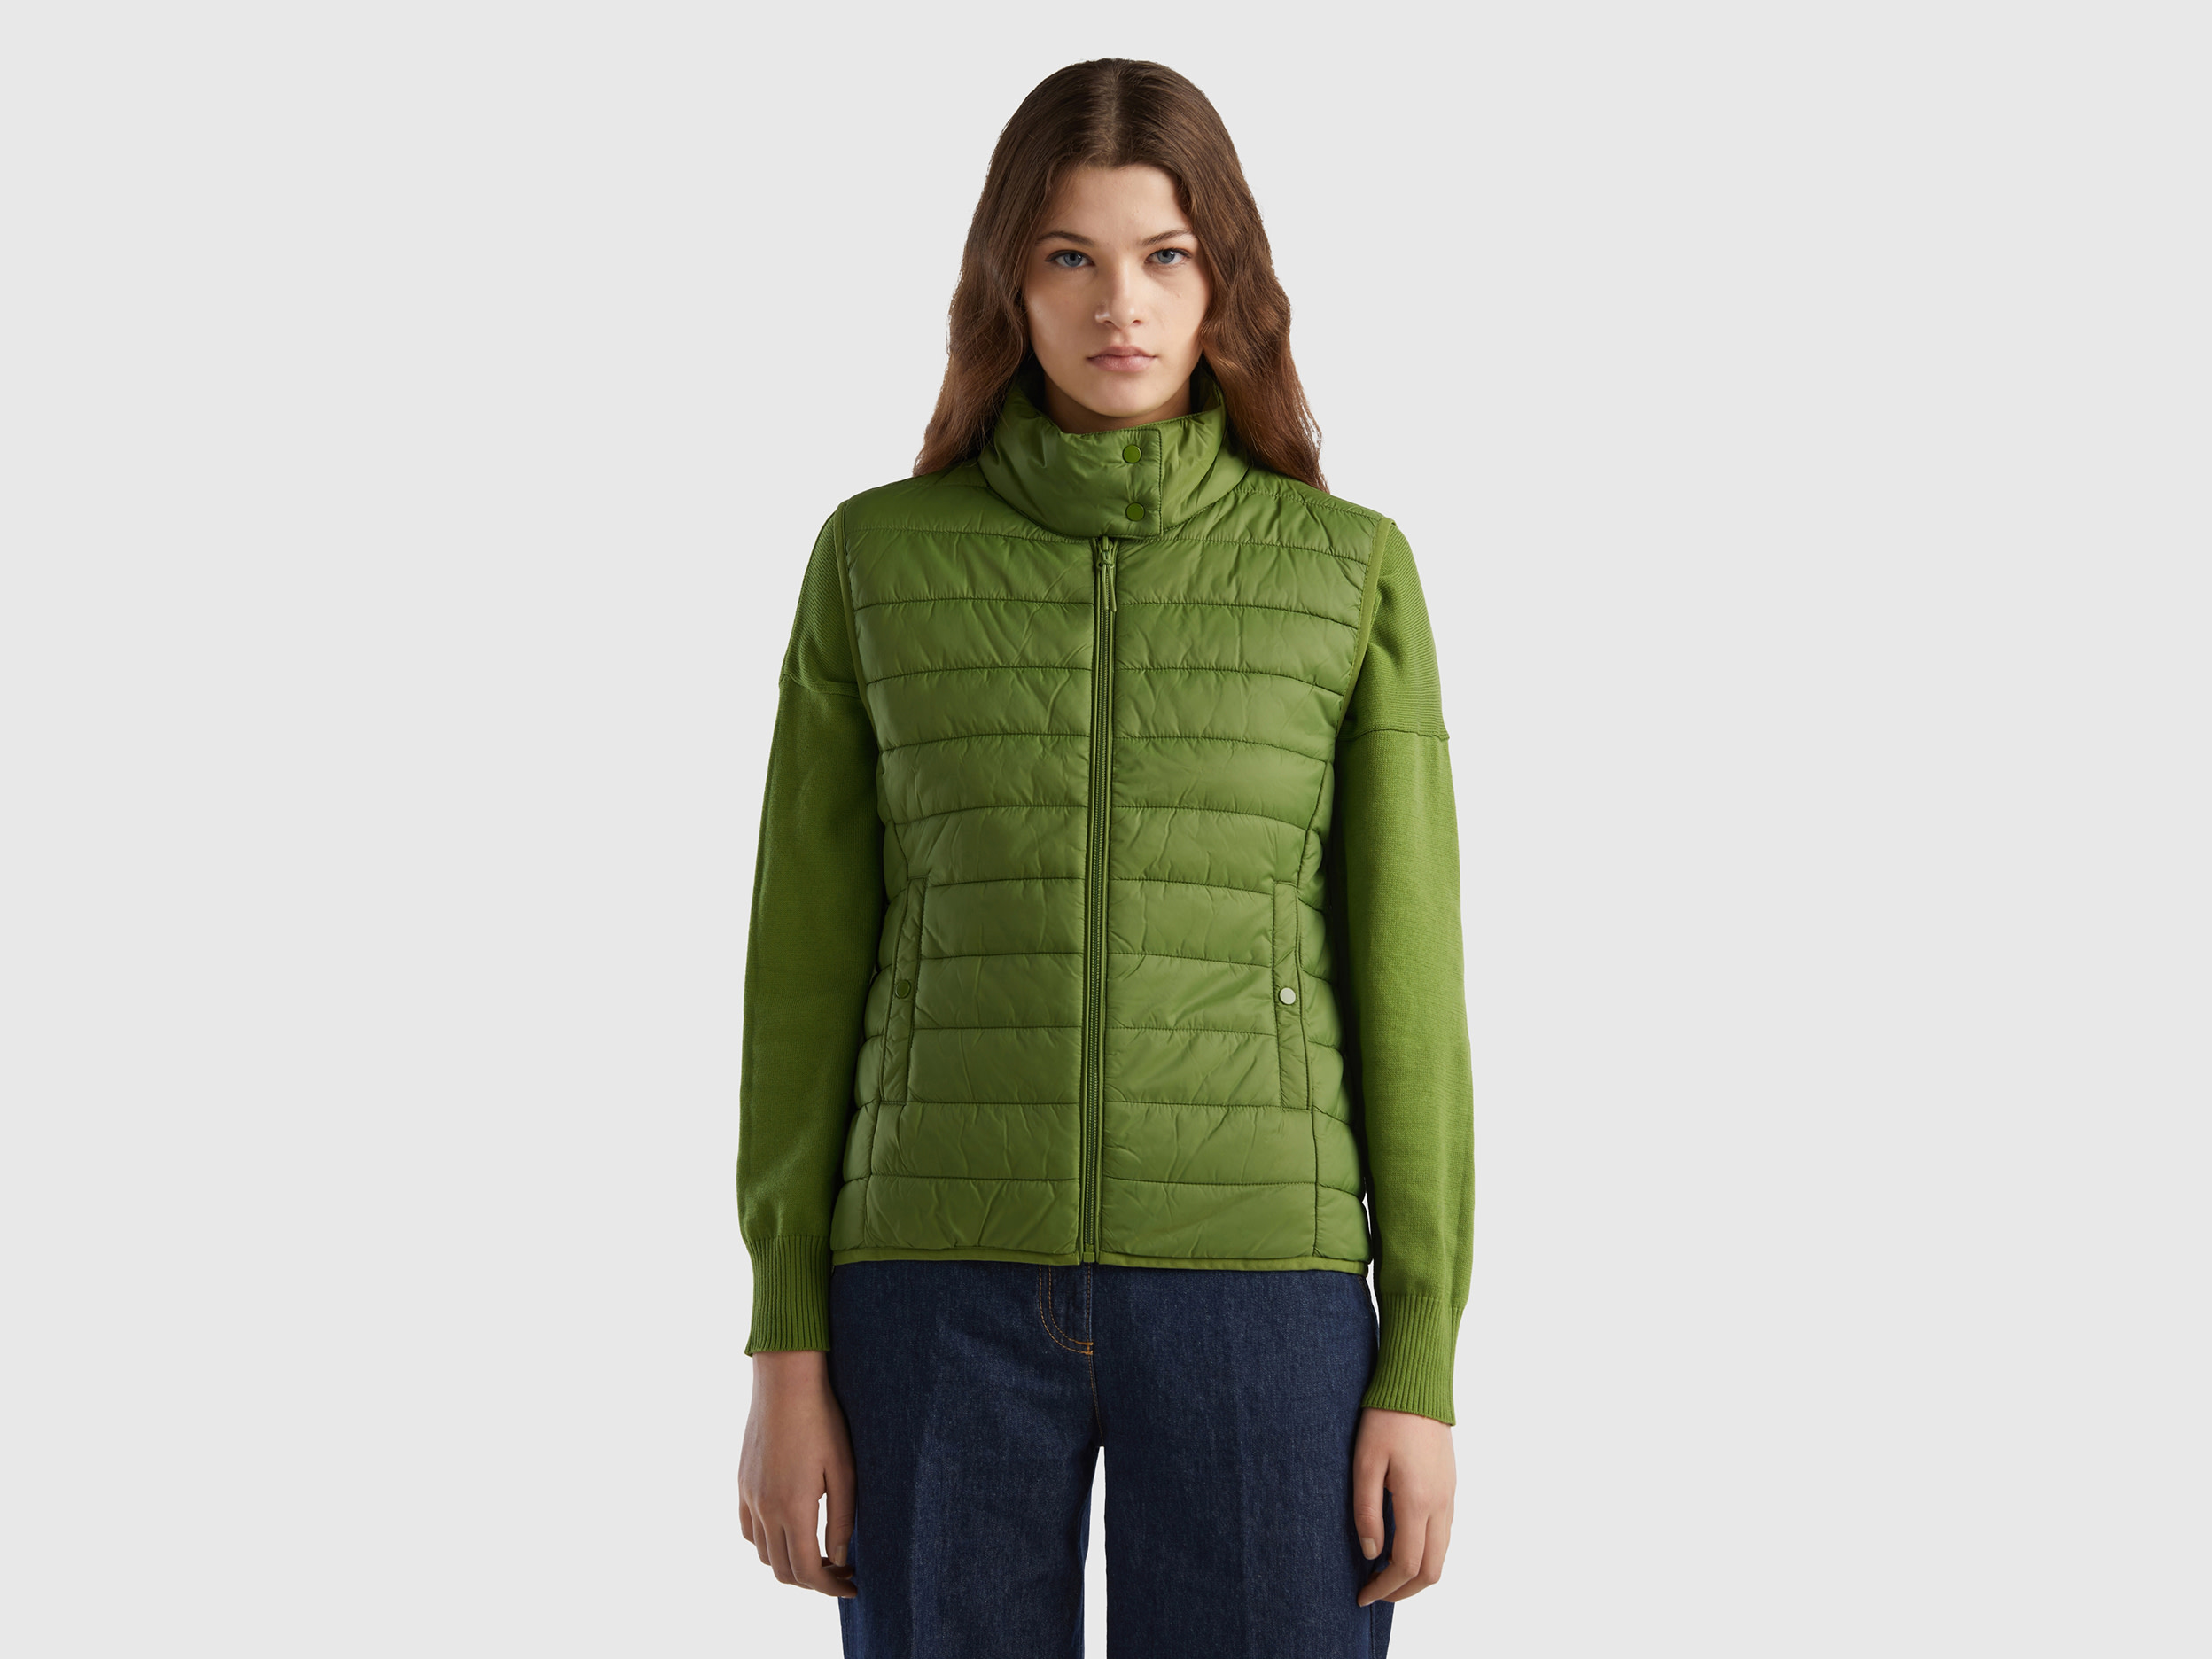 Benetton, Sleeveless Puffer Jacket With Recycled Wadding, size XS, Military Green, Women